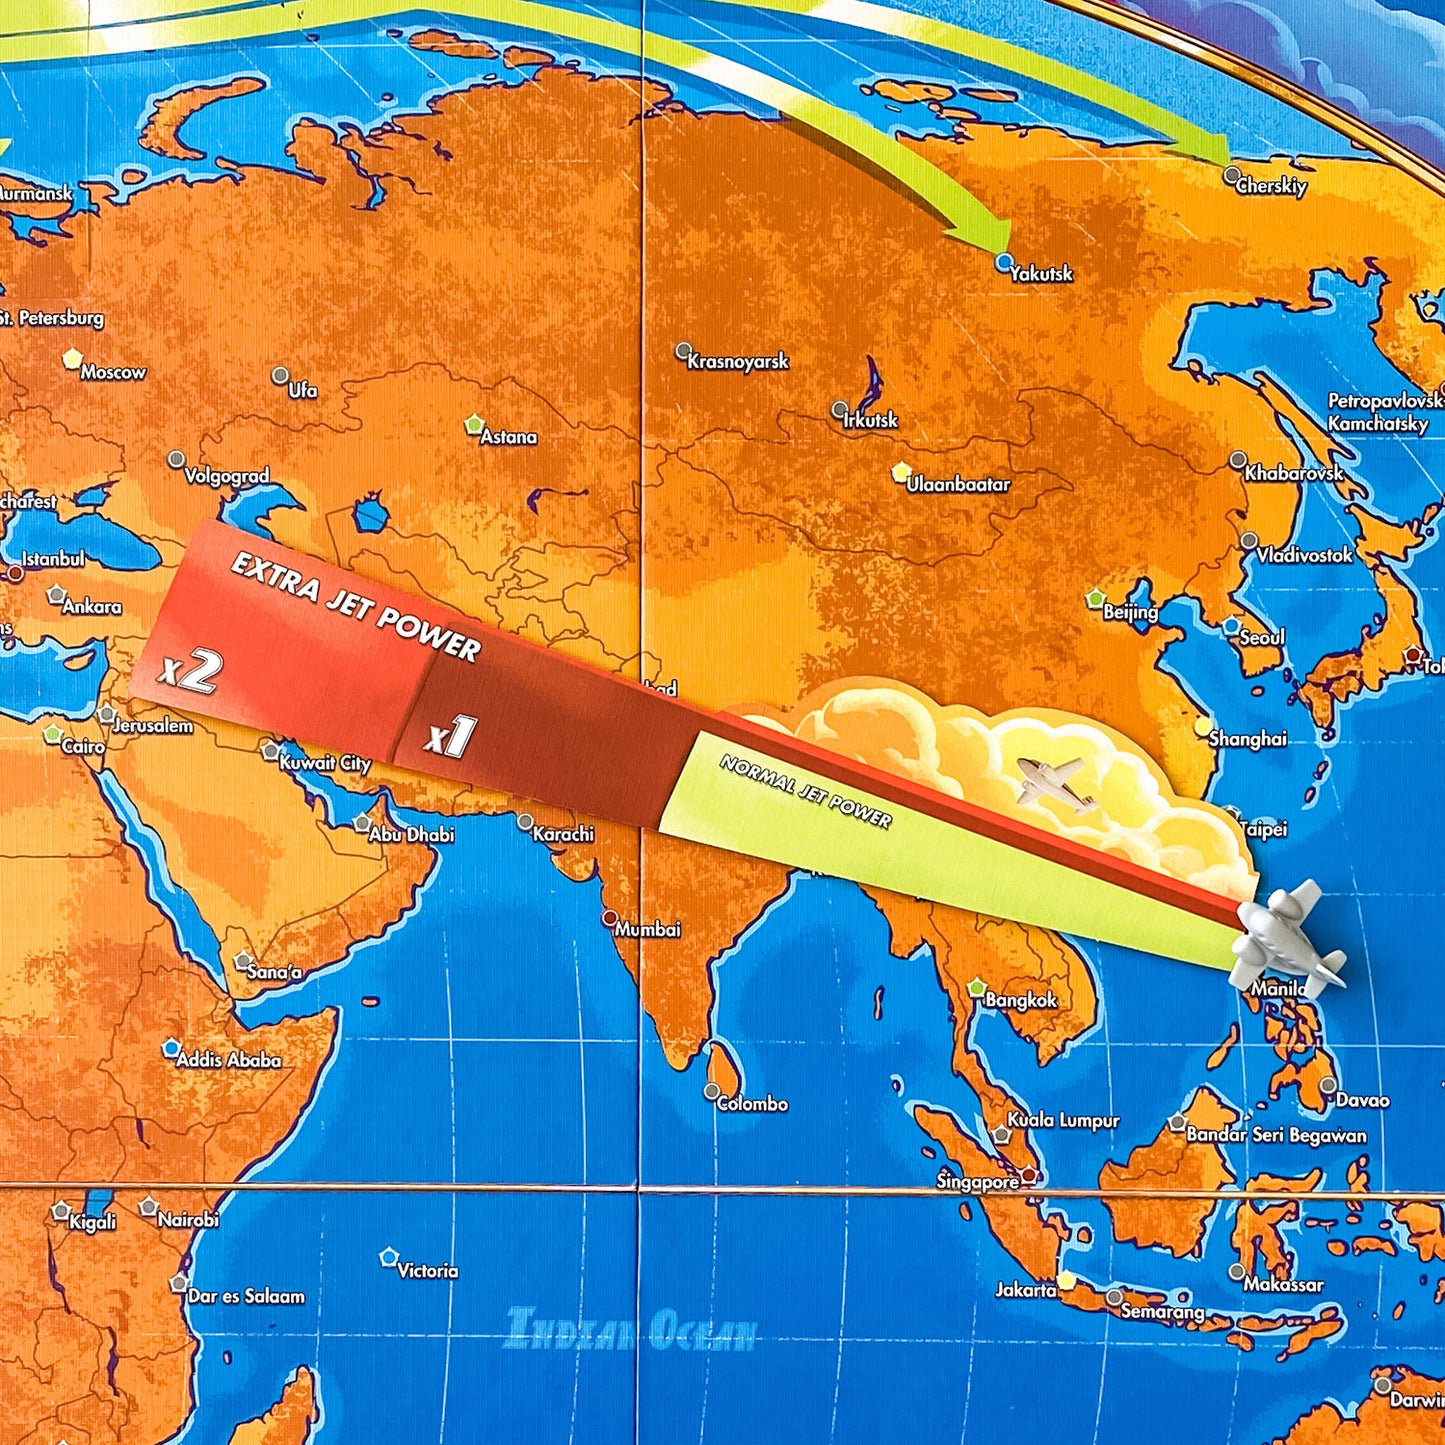 Let's Jet by SimplyFun is a fun geography game that teaches world facts.